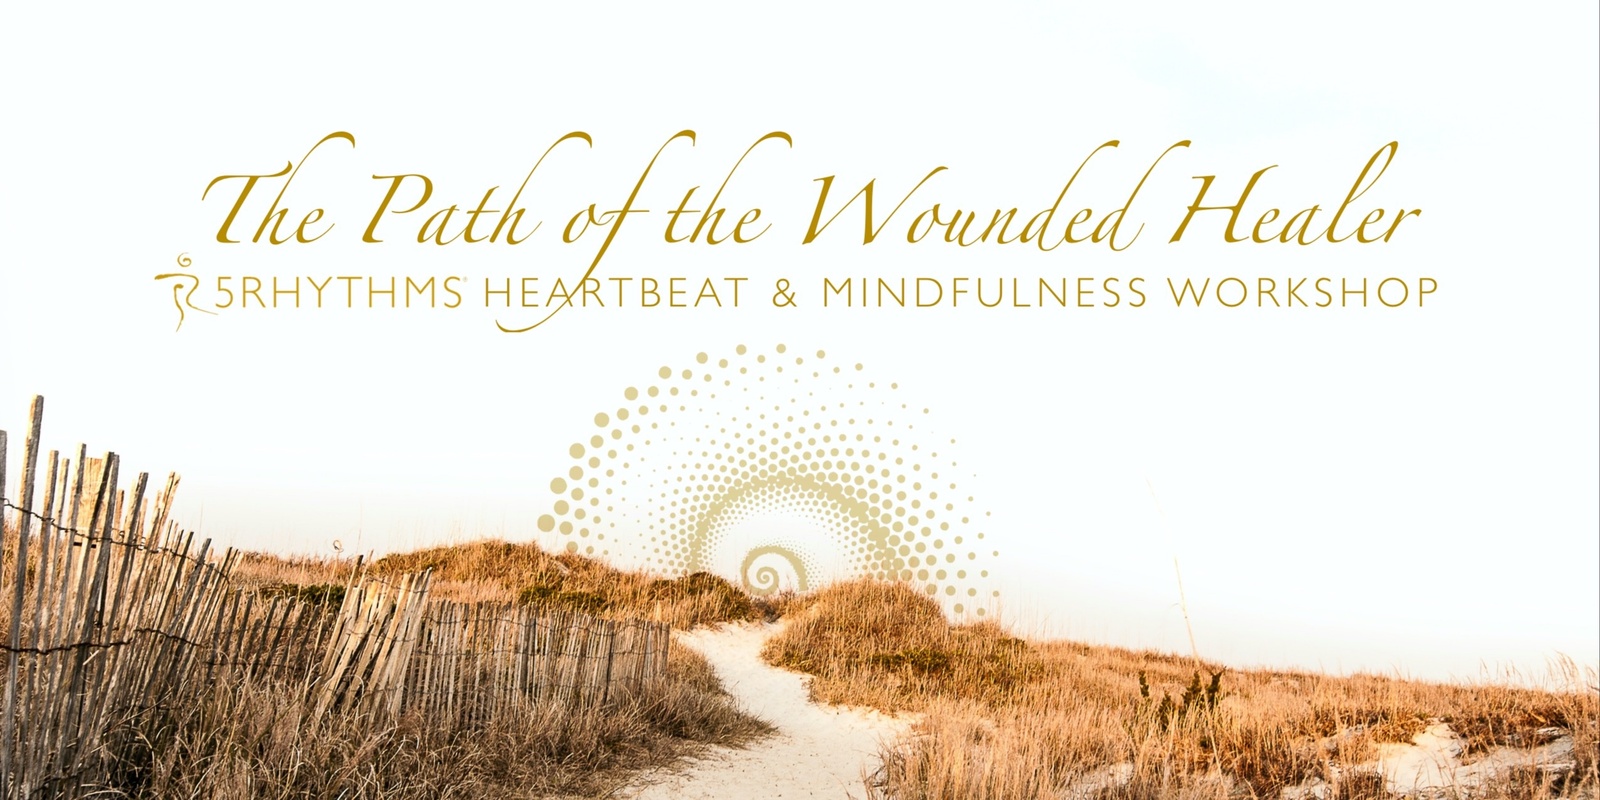 The Path of the Wounded Healer ~ A 5Rhythms Heartbeat & Mindfulness Workshop with Lucia Horan (USA)